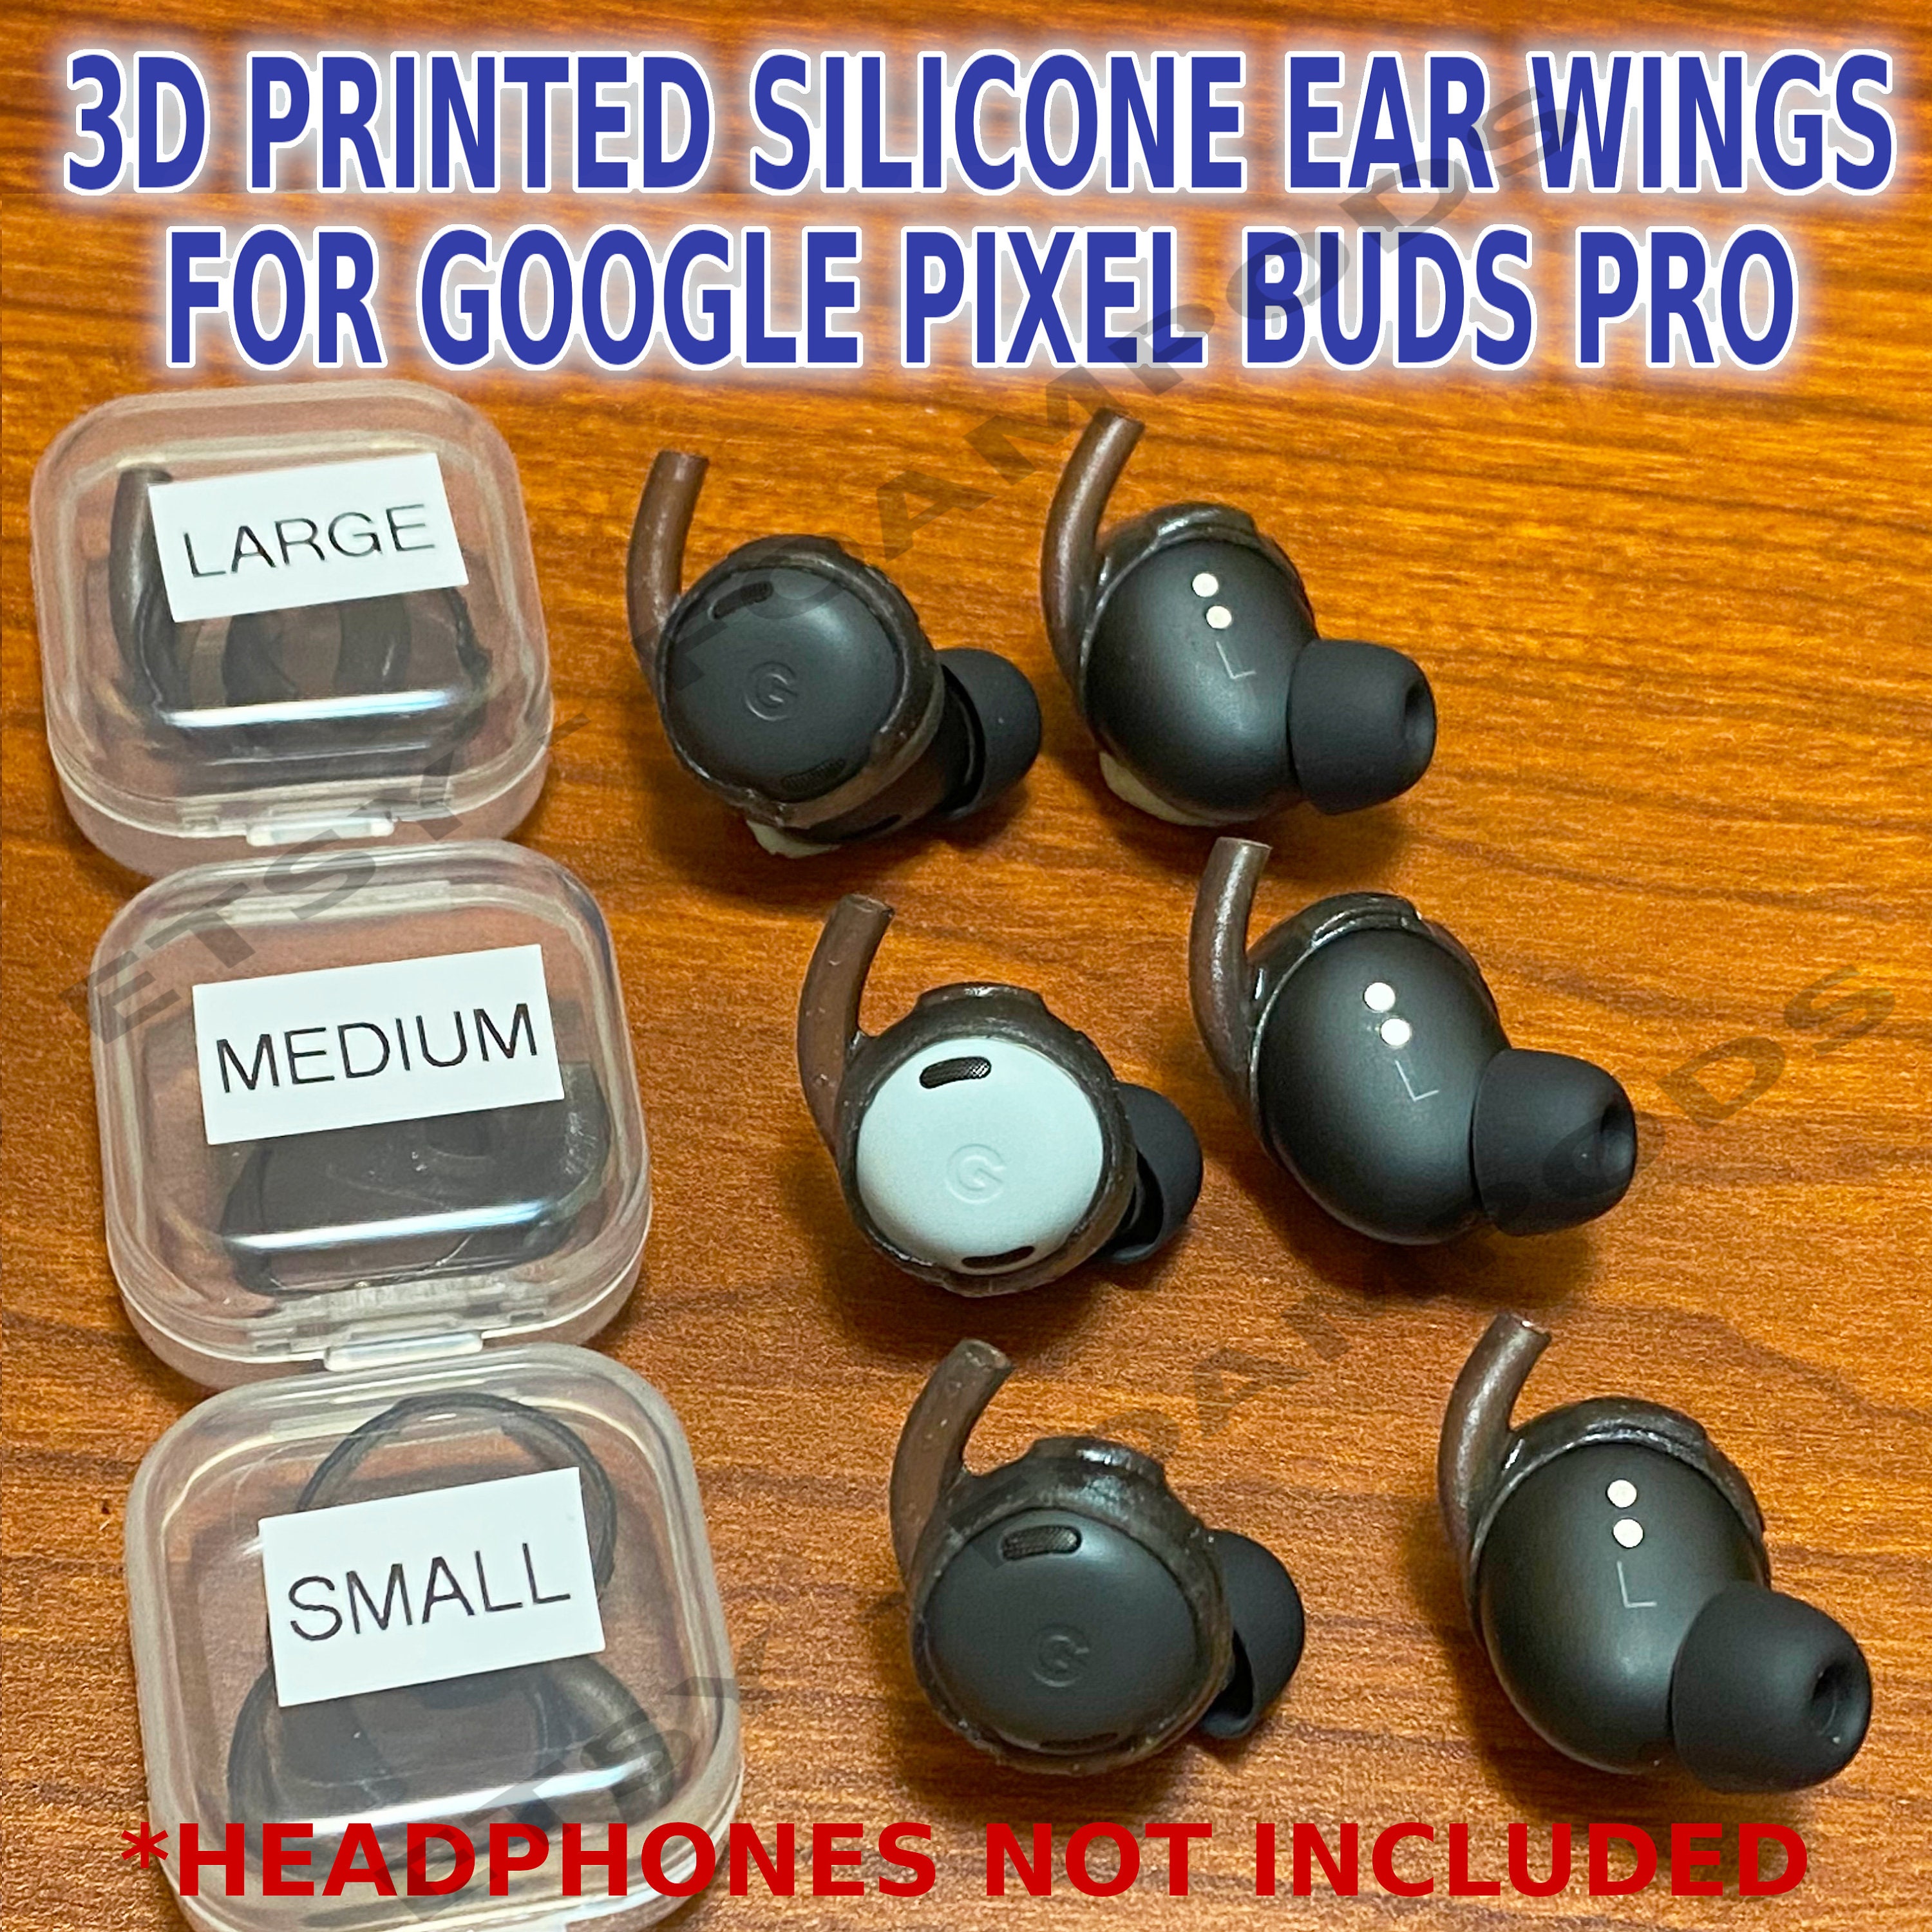 Google's new Pixel Buds Pro come with noise cancellation and long